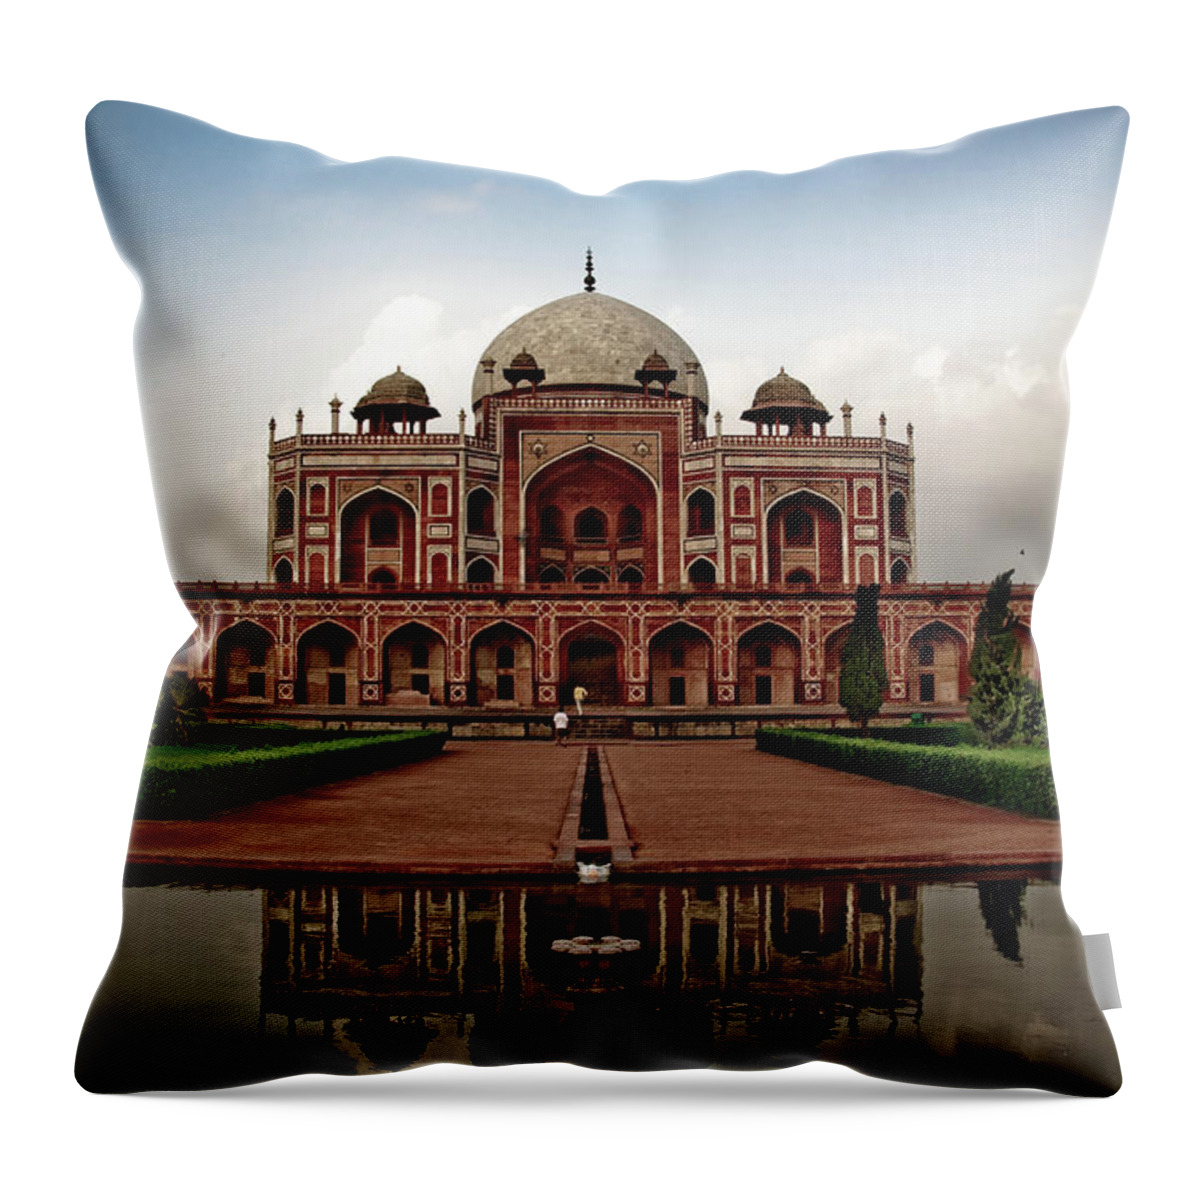 Standing Water Throw Pillow featuring the photograph Tomb Of Humayun by Kishor Krishnamoorthi